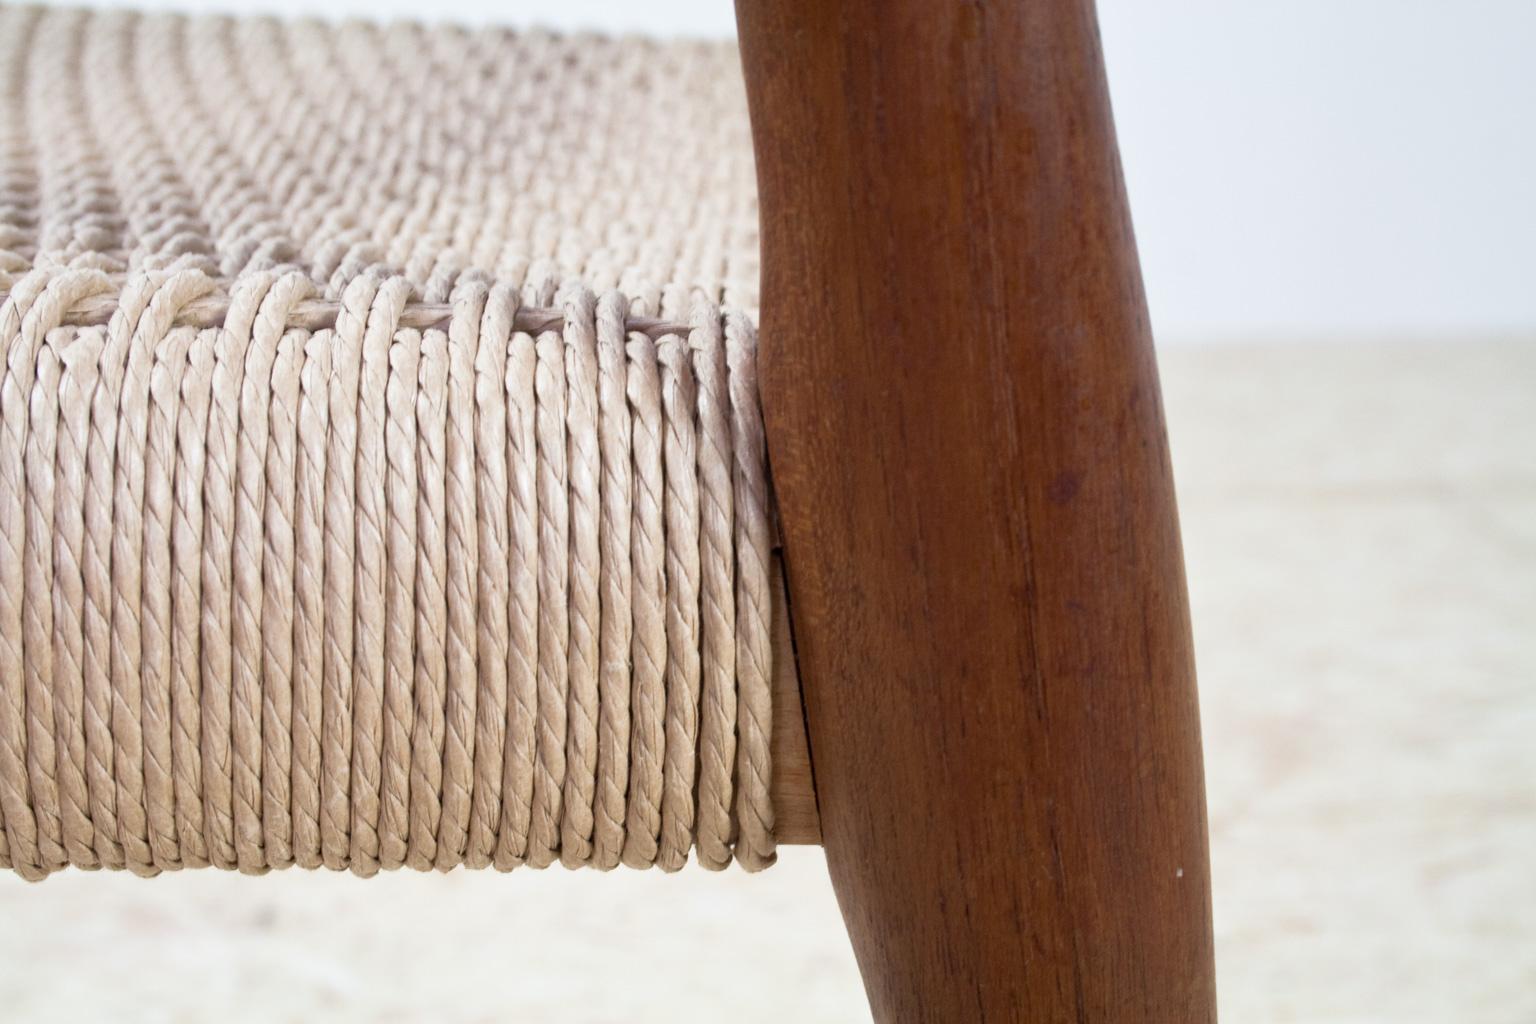 Scandinavian Modern Dining Chair in Teak and Paper Cord by Niels Moller, 1954 For Sale 1